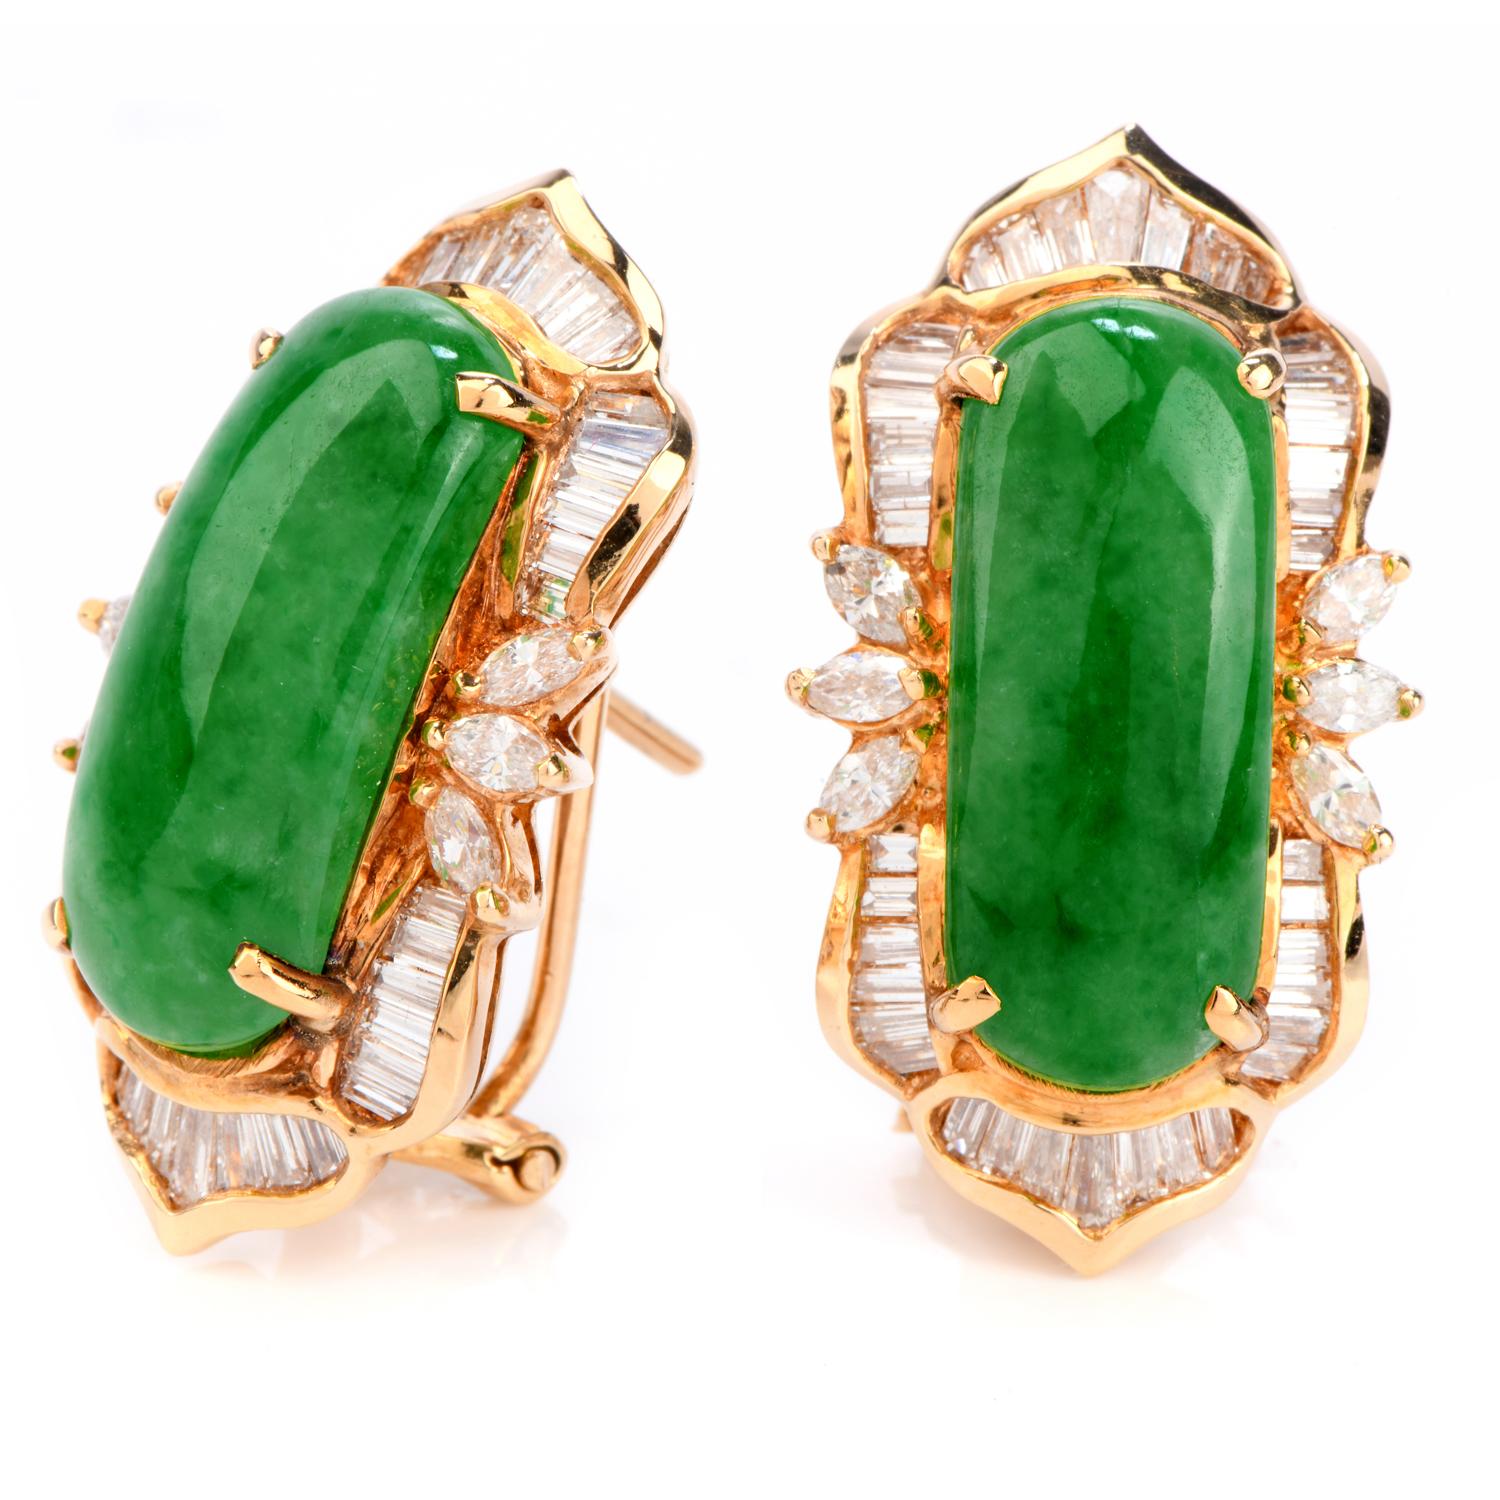 Captivate all the looks, thanks to this Vivid Green Jade & Diamond Earrings!

Be bold by wearing such a piece of art! These daring earrings are crafted with 18k yellow gold, weighing 18.8 grams and measuring 18 mm x 15 mm.

In the center there are